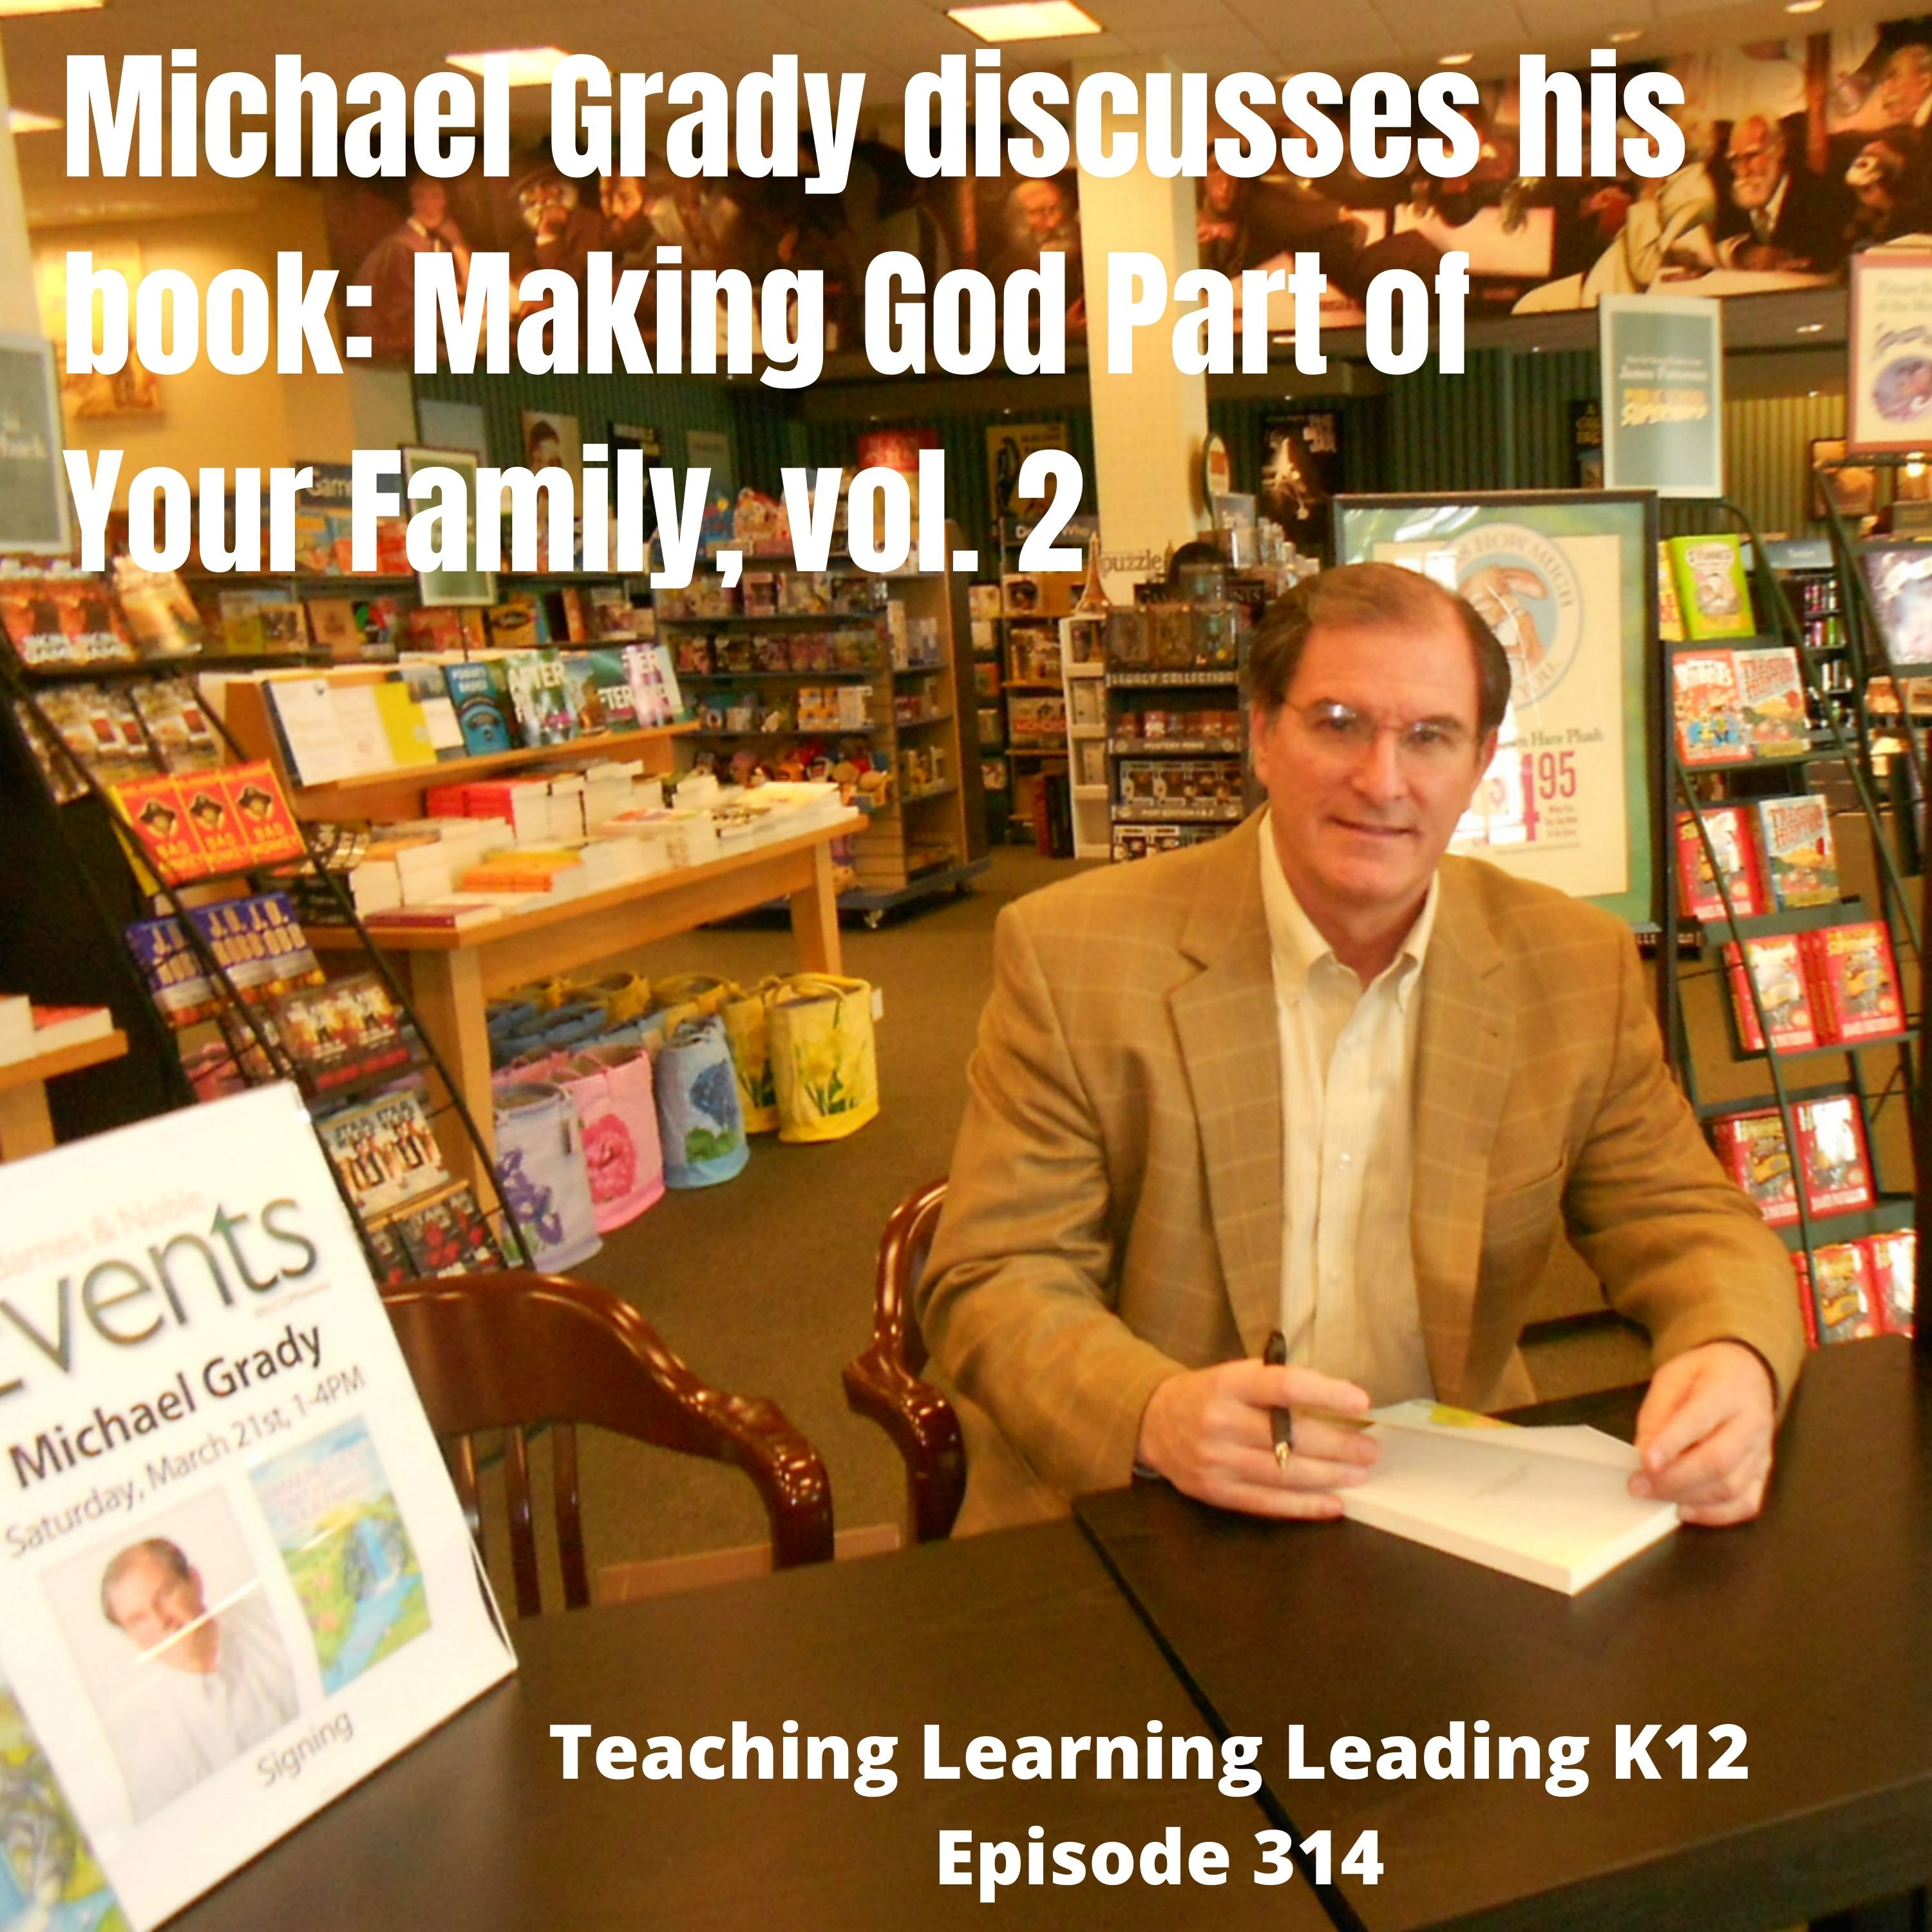 Michael Grady discusses his book: Making God Part of Your Family, vol.2 - 314